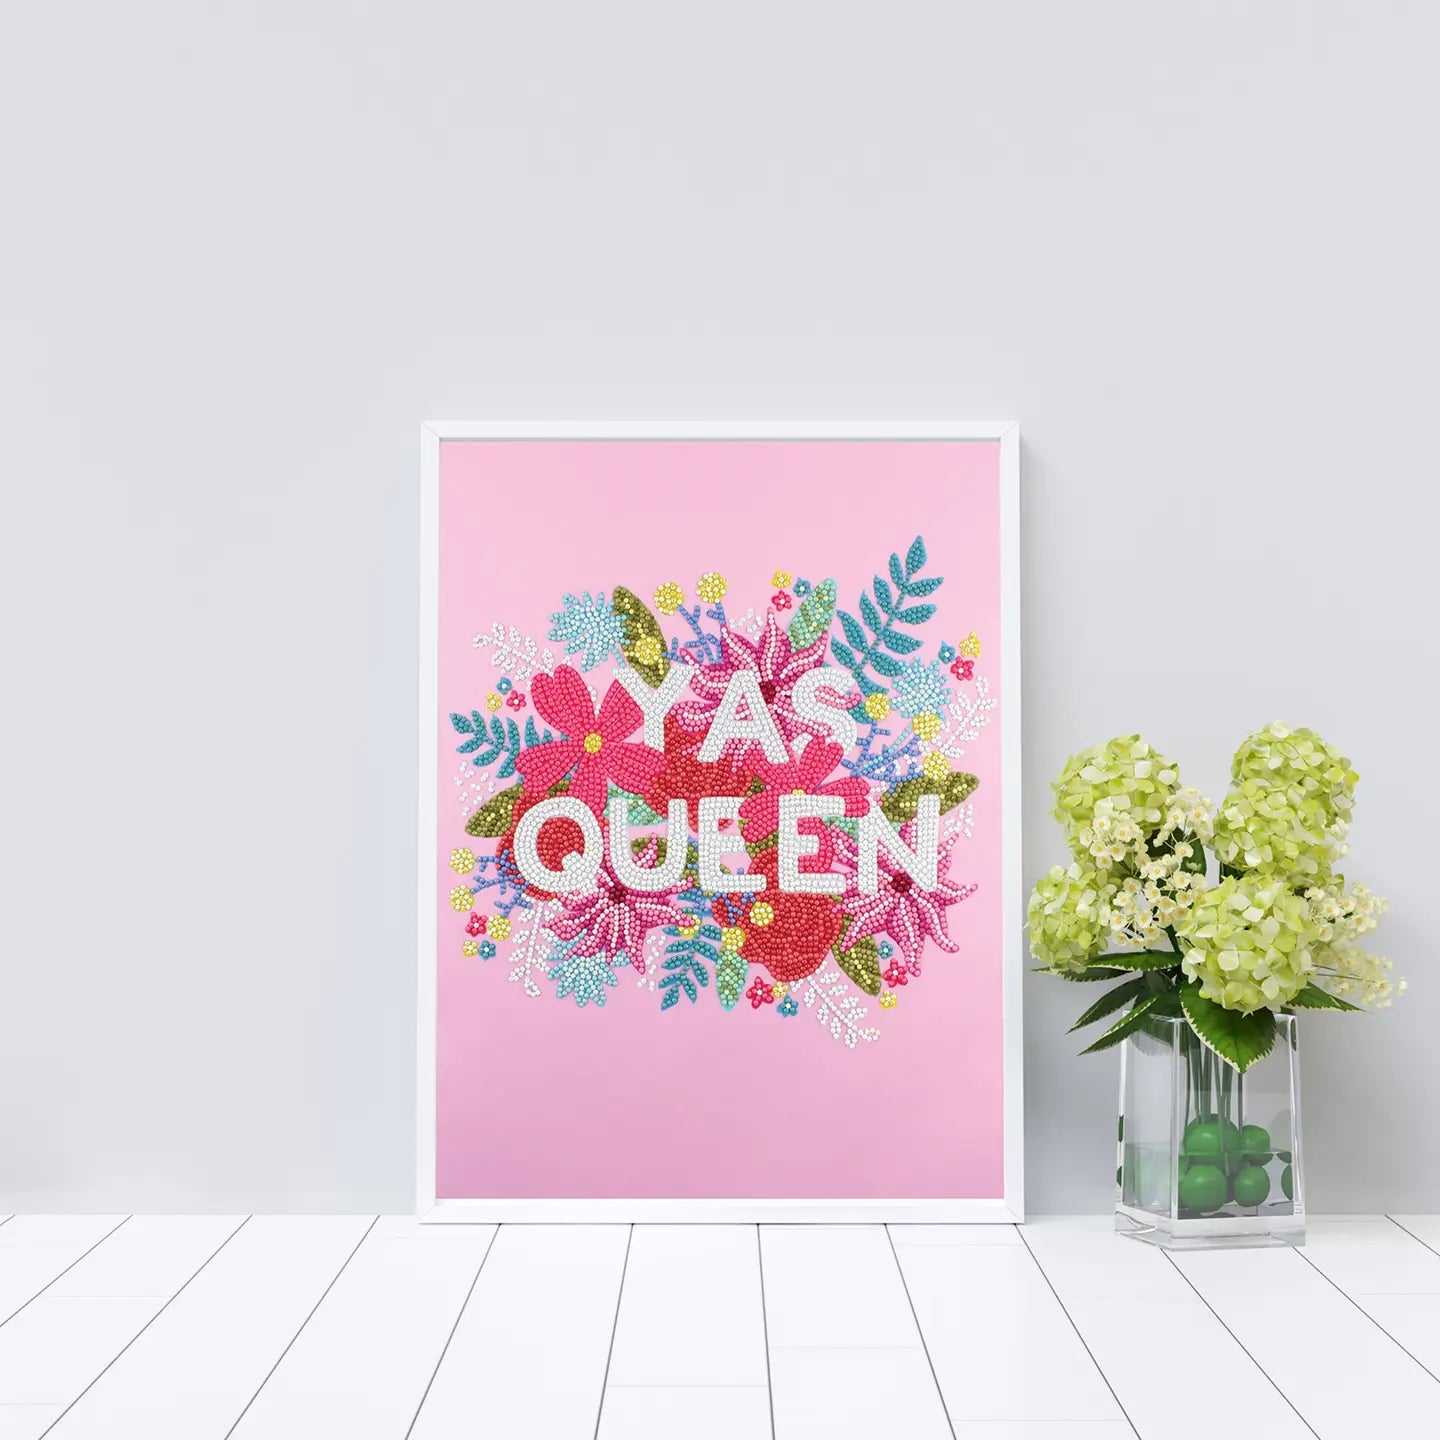 Yas Queen Diamond Painting Kit -Preorder